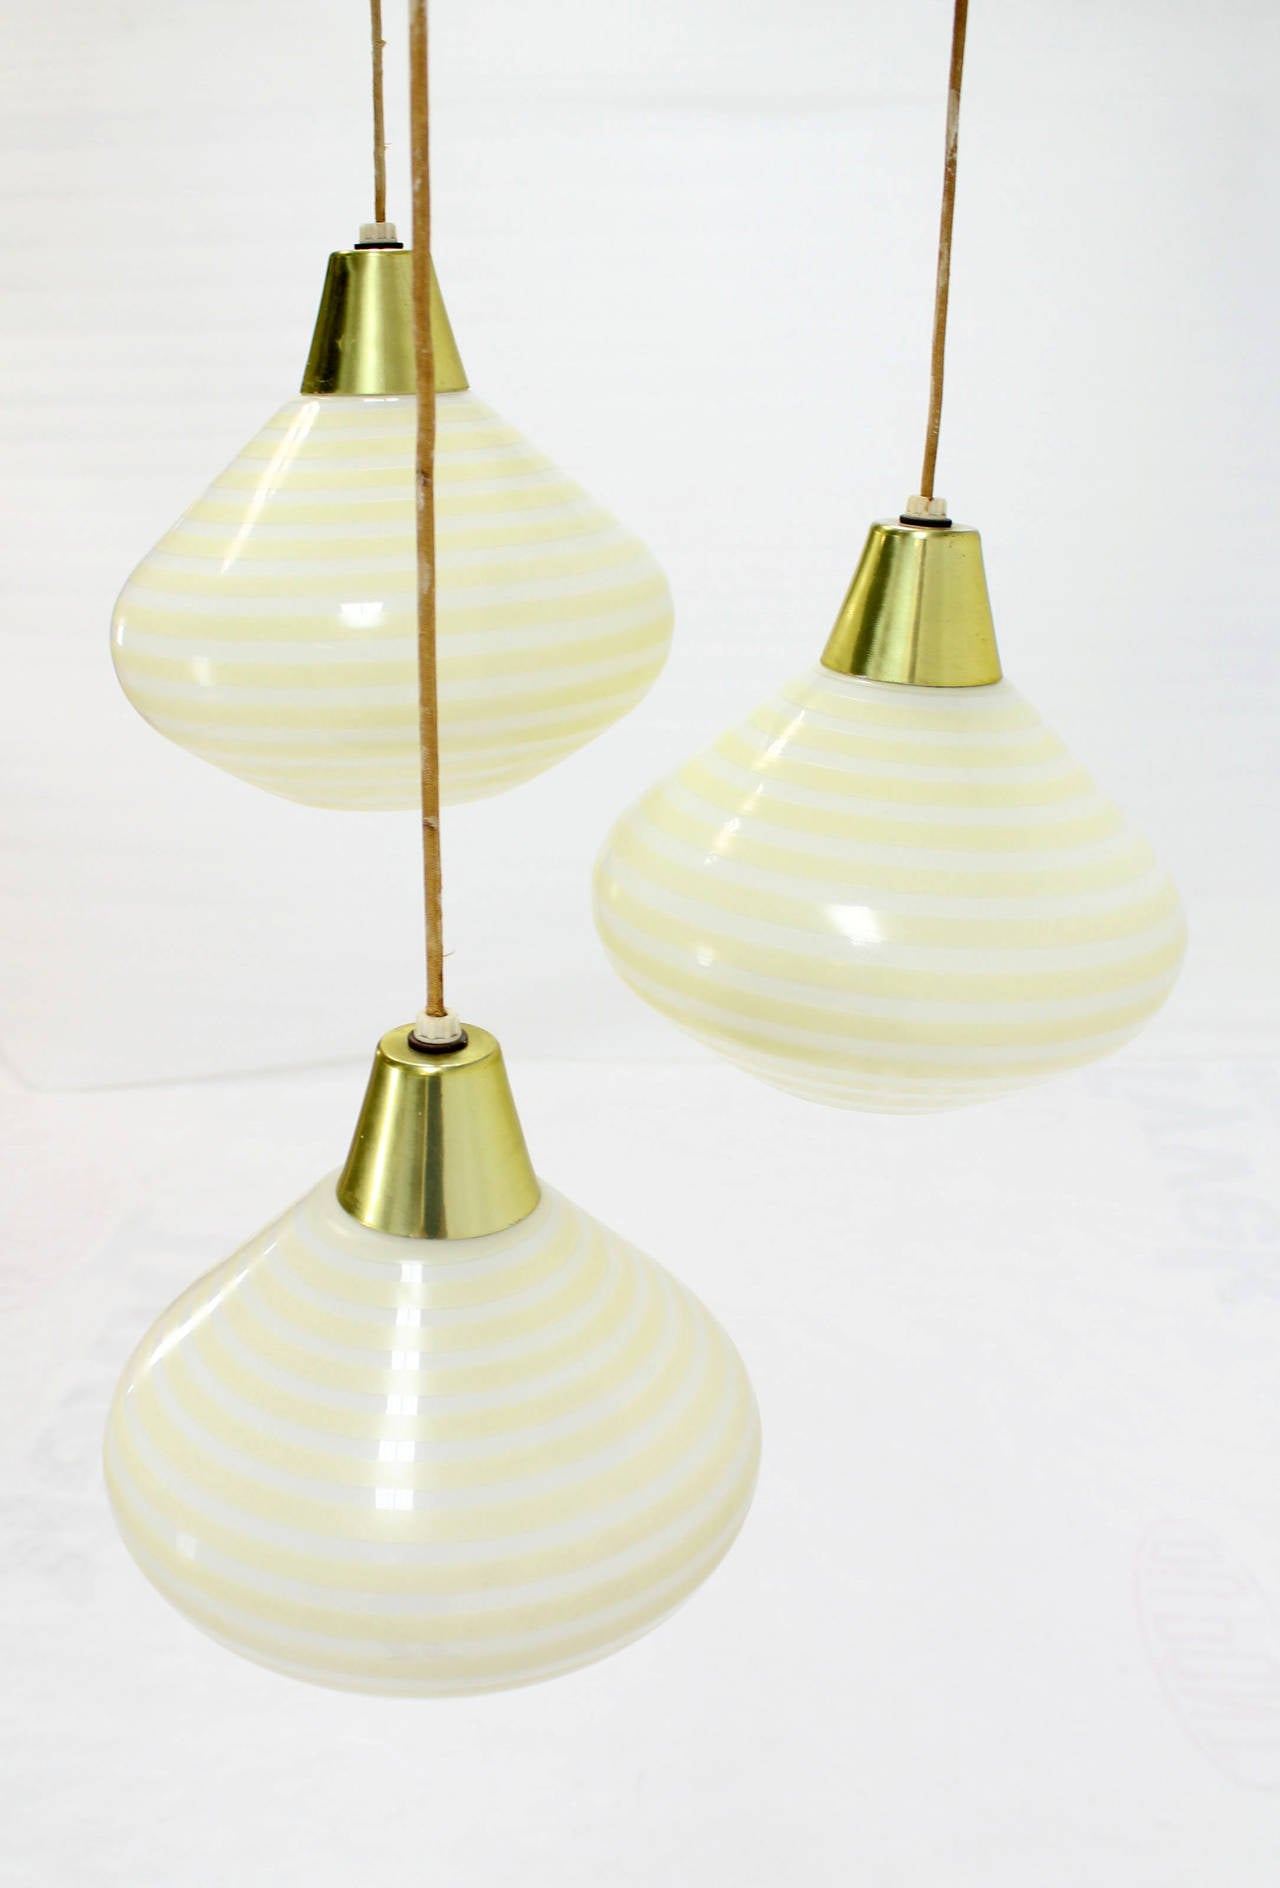 cone shaped light fixtures